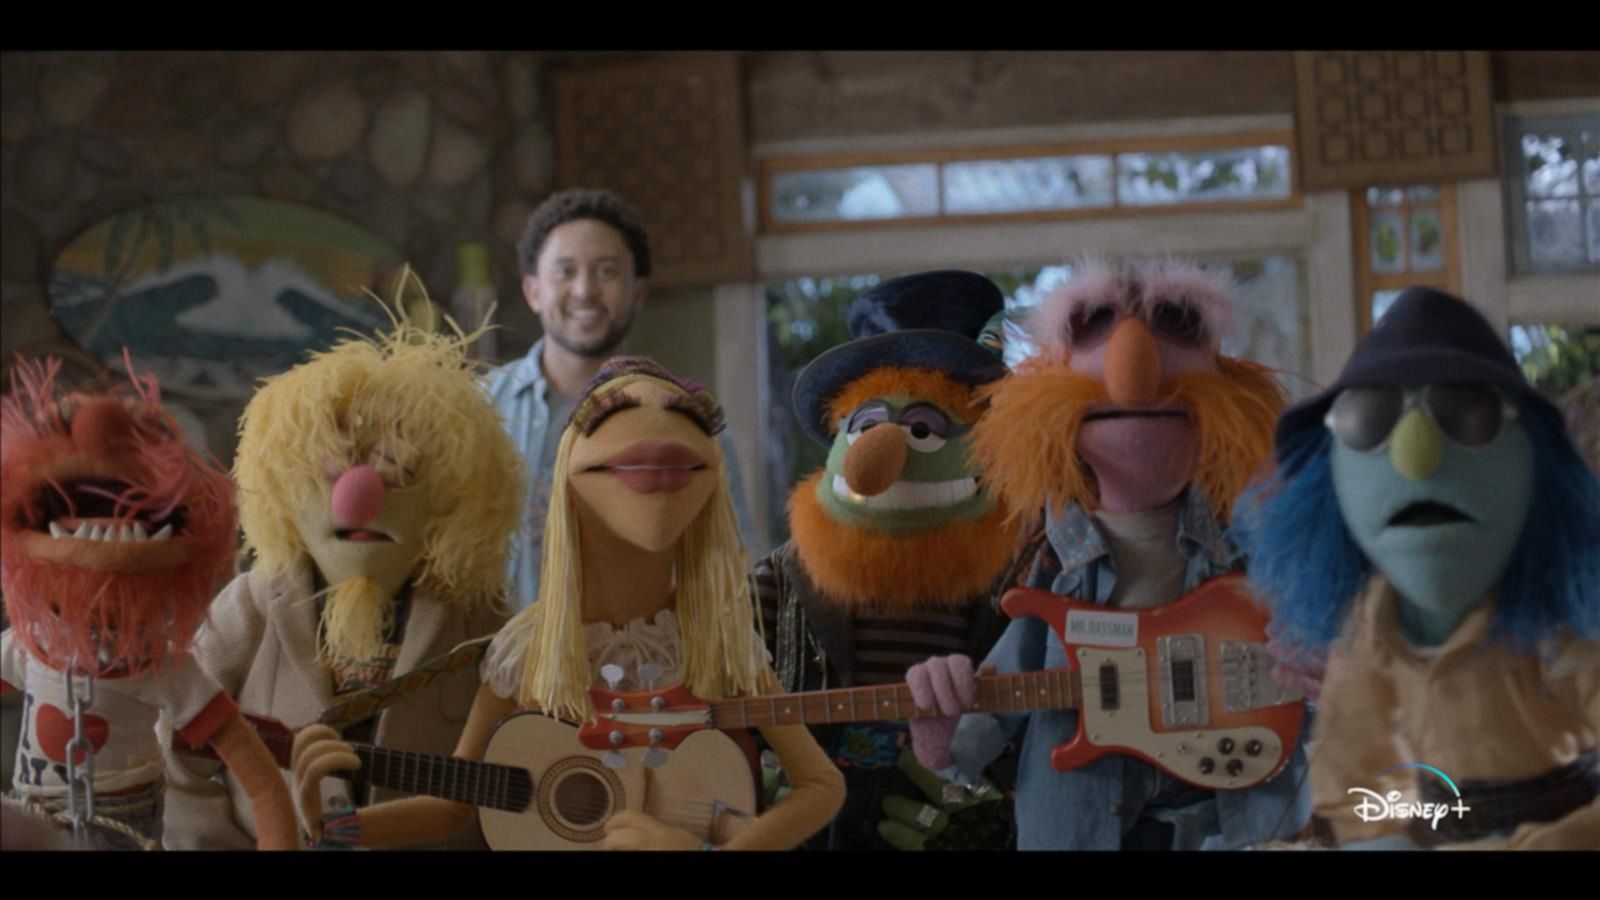 for 'The Muppets Mayhem' debuts